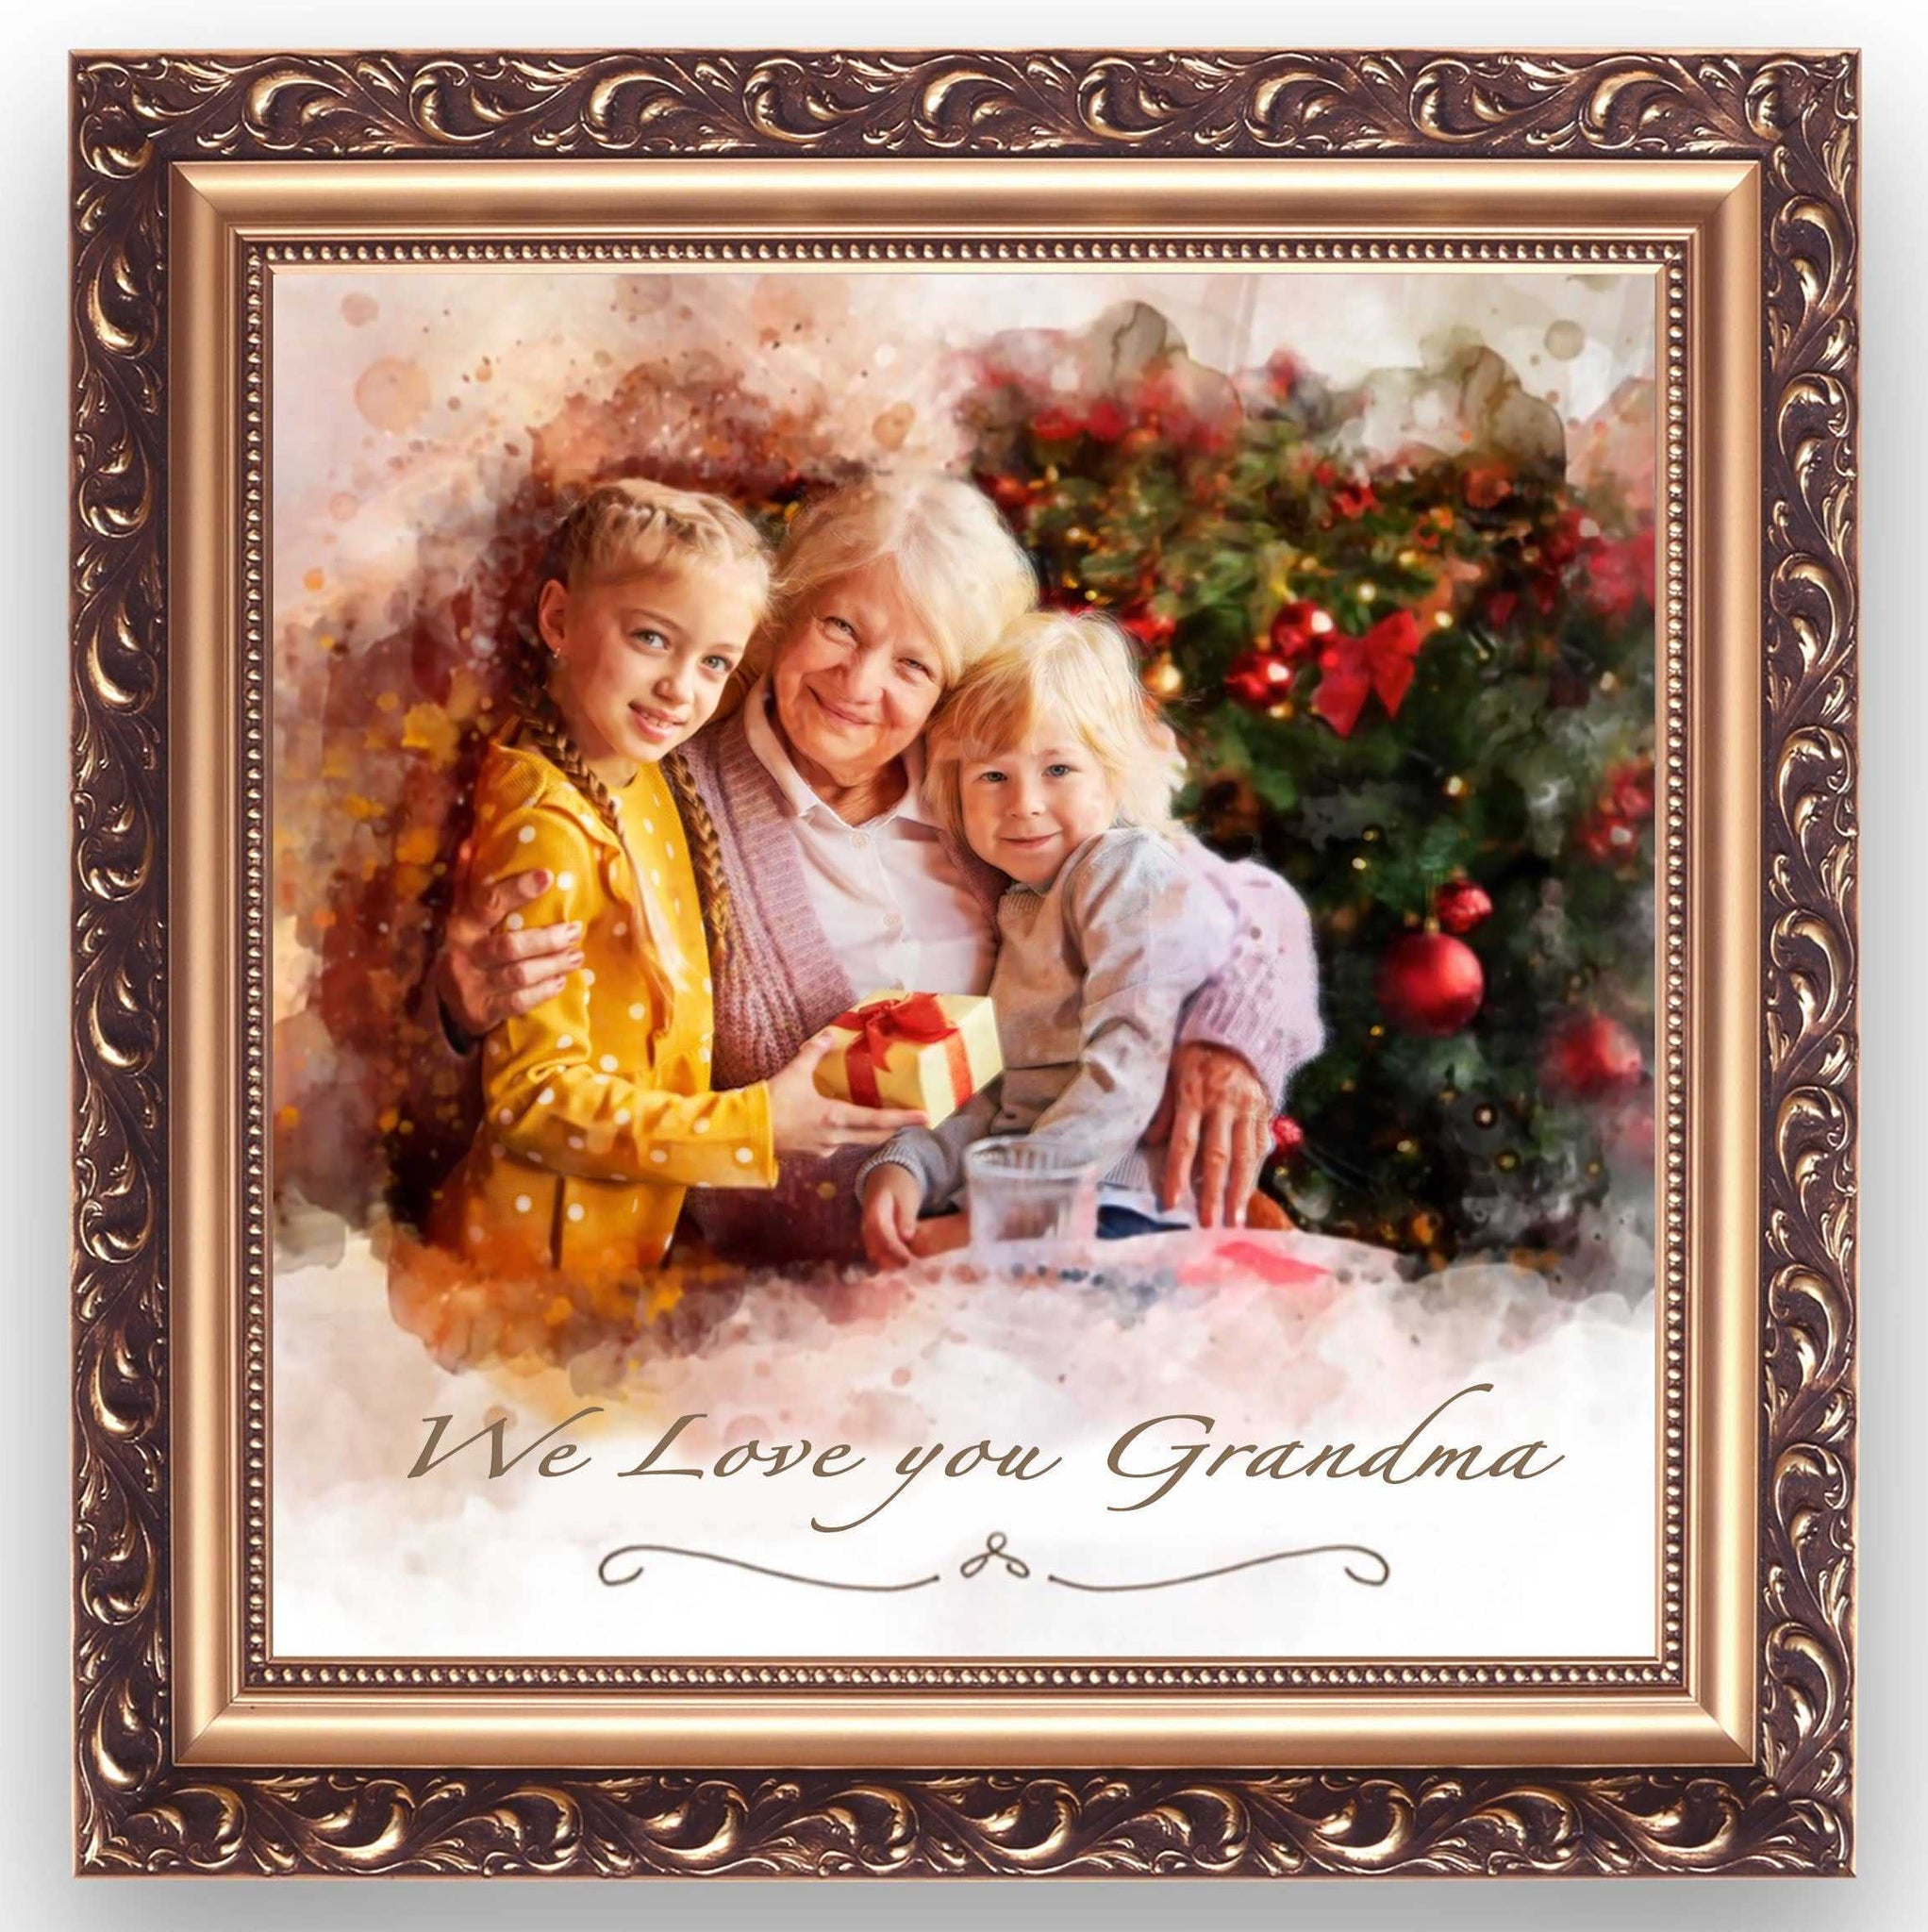 Christmas Gifts for Mother | Gifts to give Mom for Christmas | Gift ideas for Mom - FromPicToArt